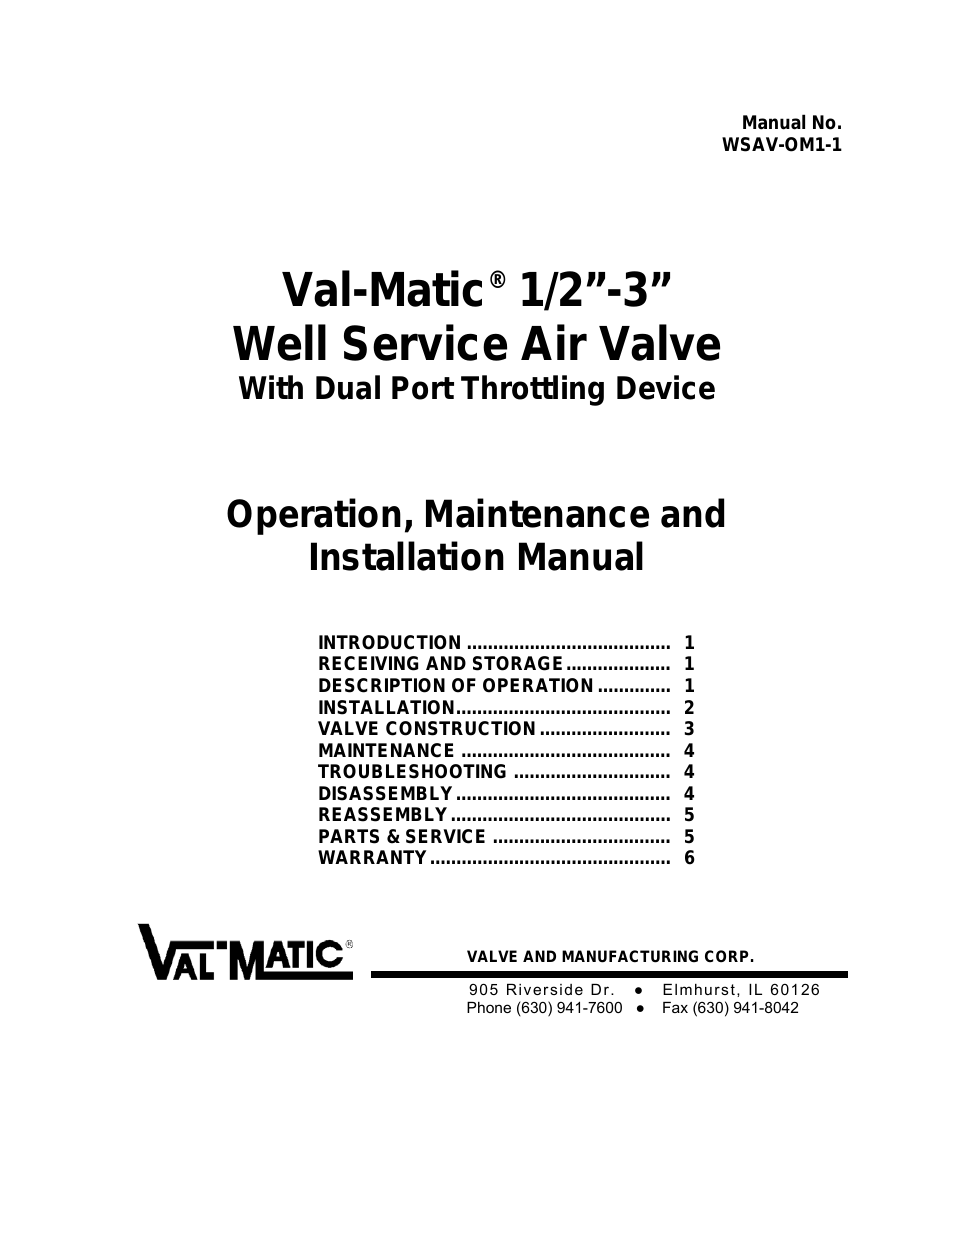 1/2-3 Well Service Air Valve With Dual Port Throttling Device